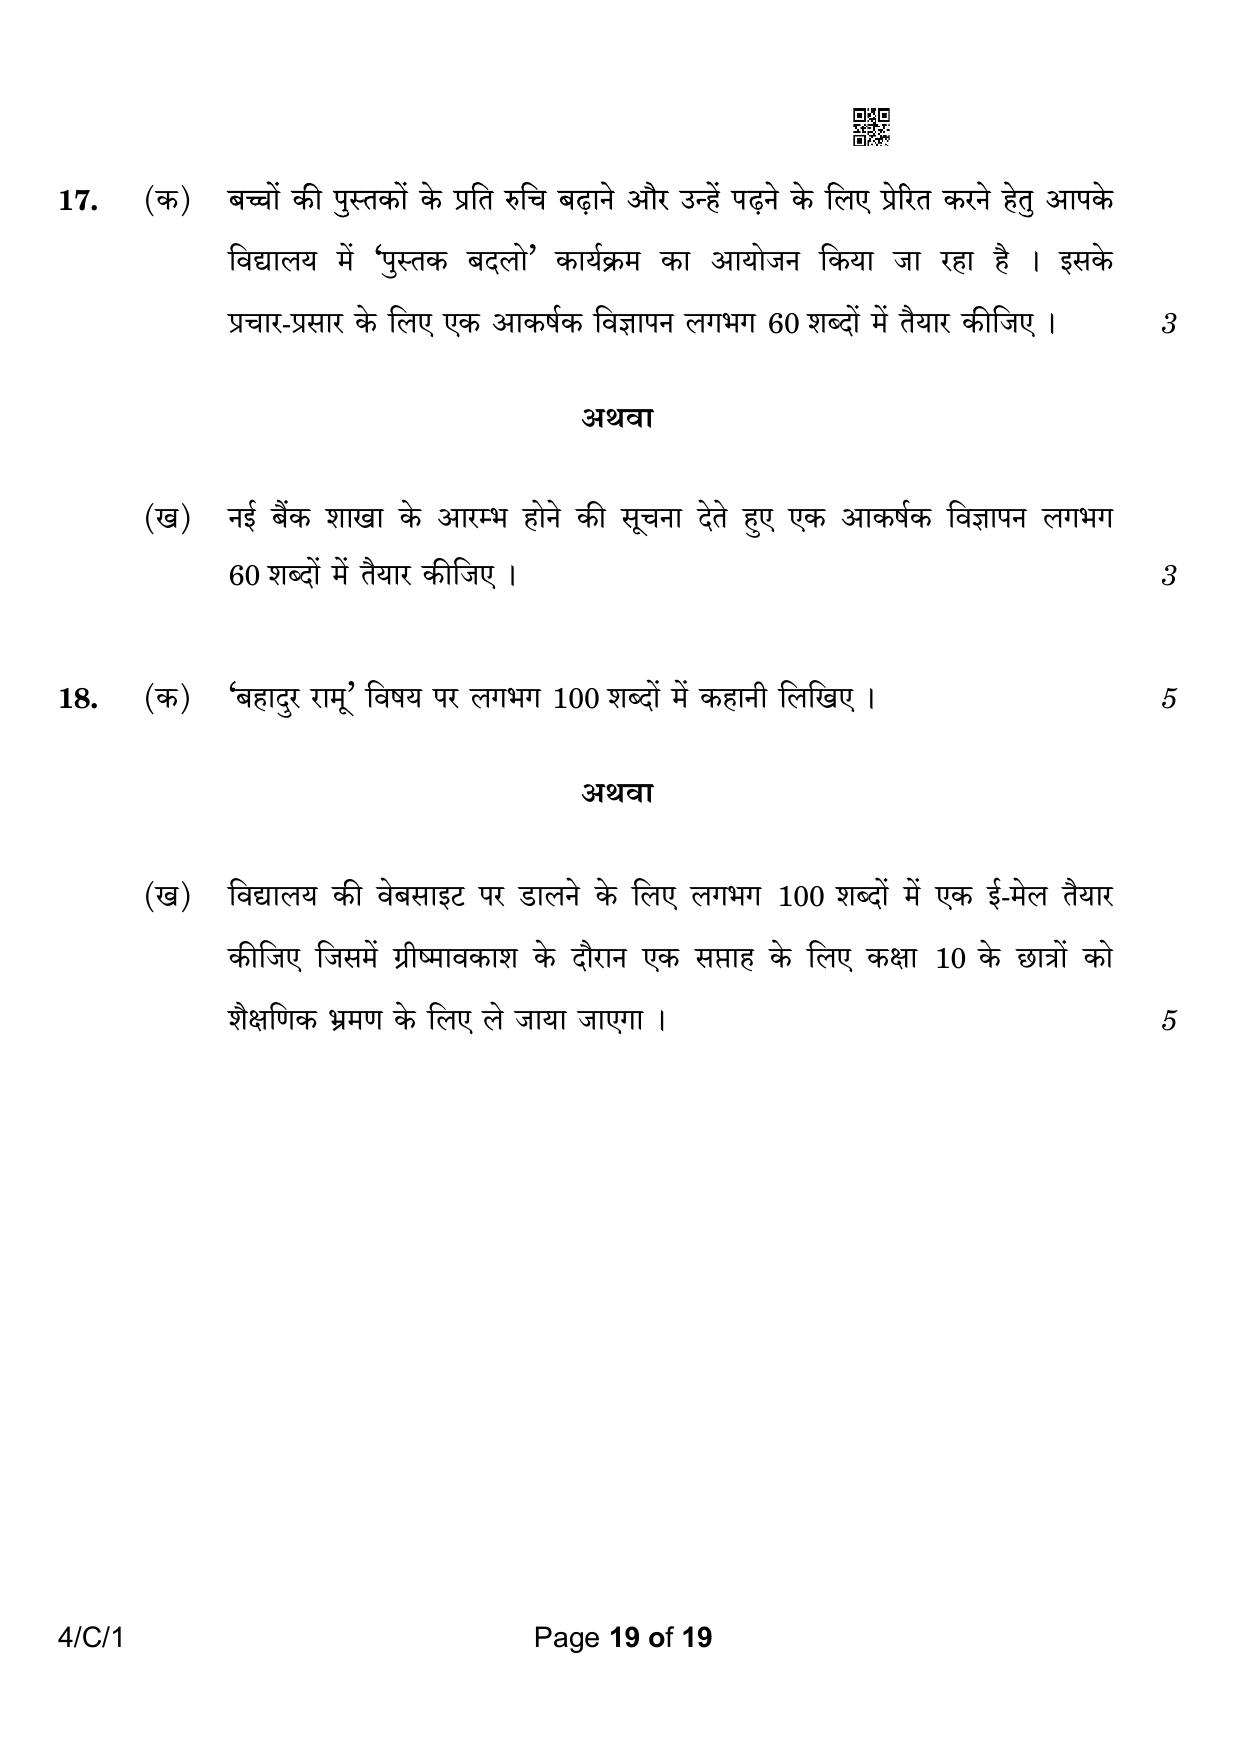 CBSE Class 10 4-1 Hindi B 2023 (Compartment) Question Paper - Page 19